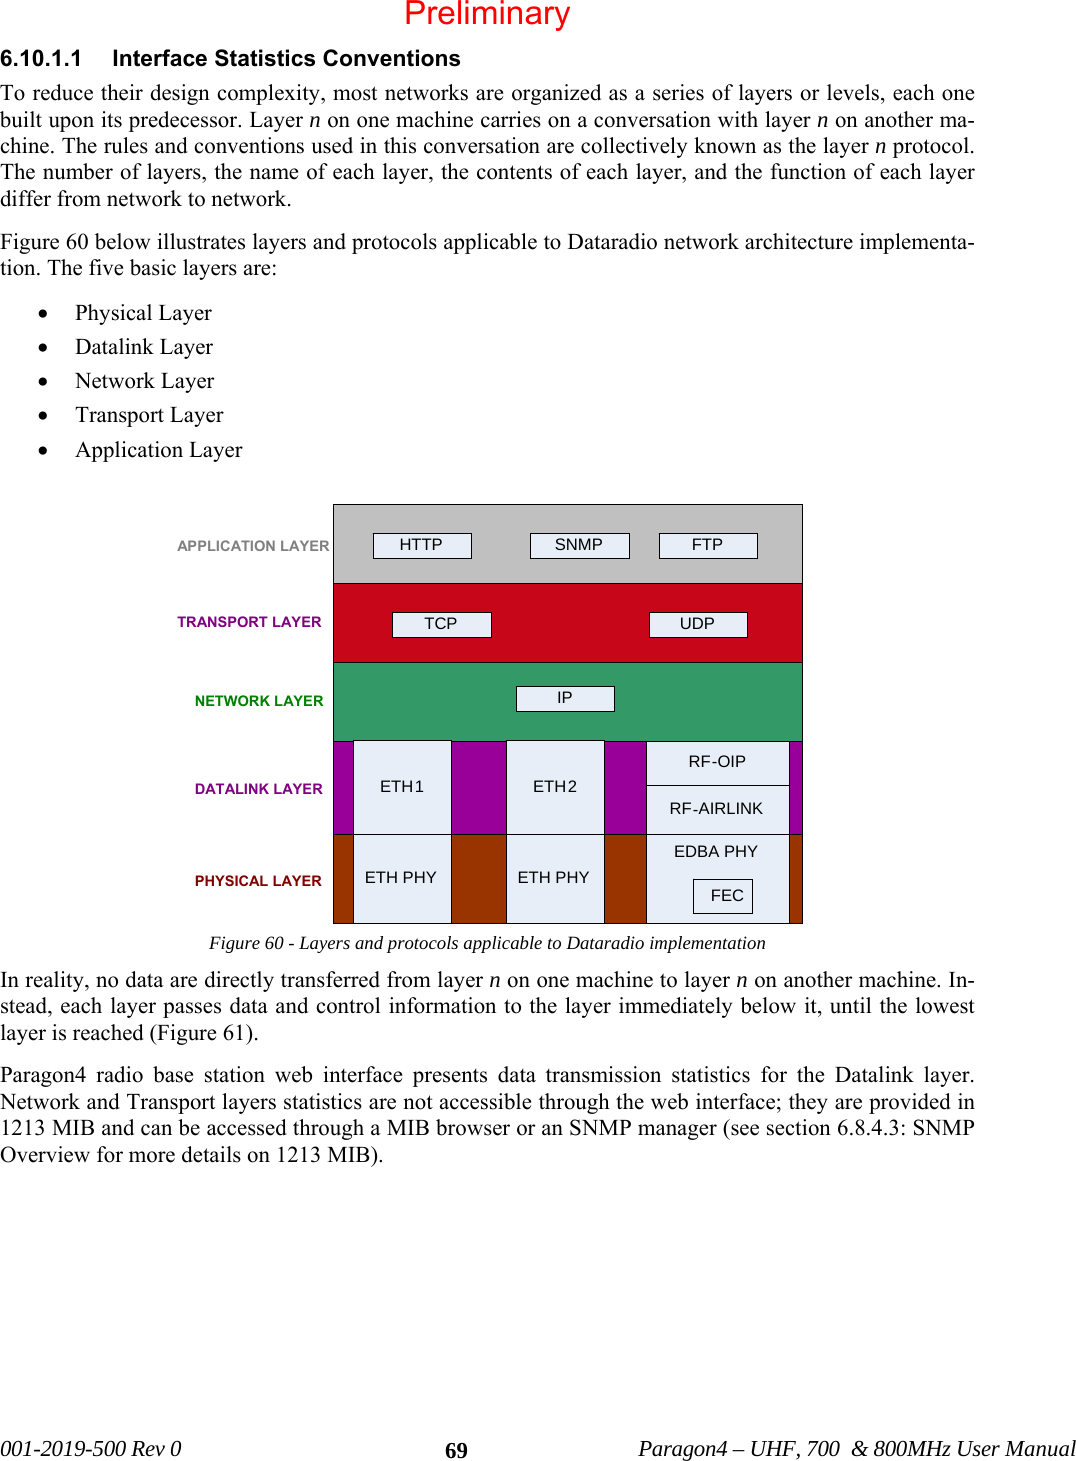   001-2019-500 Rev 0          Paragon4 – UHF, 700  &amp; 800MHz User Manual   696.10.1.1  Interface Statistics Conventions  To reduce their design complexity, most networks are organized as a series of layers or levels, each one built upon its predecessor. Layer n on one machine carries on a conversation with layer n on another ma-chine. The rules and conventions used in this conversation are collectively known as the layer n protocol. The number of layers, the name of each layer, the contents of each layer, and the function of each layer differ from network to network.  Figure 60 below illustrates layers and protocols applicable to Dataradio network architecture implementa-tion. The five basic layers are: • Physical Layer  • Datalink Layer • Network Layer • Transport Layer • Application Layer Figure 60 - Layers and protocols applicable to Dataradio implementation In reality, no data are directly transferred from layer n on one machine to layer n on another machine. In-stead, each layer passes data and control information to the layer immediately below it, until the lowest layer is reached (Figure 61).  Paragon4 radio base station web interface presents data transmission statistics for the Datalink layer. Network and Transport layers statistics are not accessible through the web interface; they are provided in 1213 MIB and can be accessed through a MIB browser or an SNMP manager (see section 6.8.4.3: SNMP Overview for more details on 1213 MIB).    TRANSPORT LAYERNETWORK LAYERDATALINK LAYERPHYSICAL LAYERTCP UDPIPETH2ETH1RF-OIPETH PHY ETH PHYEDBA PHYFECRF-AIRLINKHTTP SNMP FTPAPPLICATION LAYERPreliminary